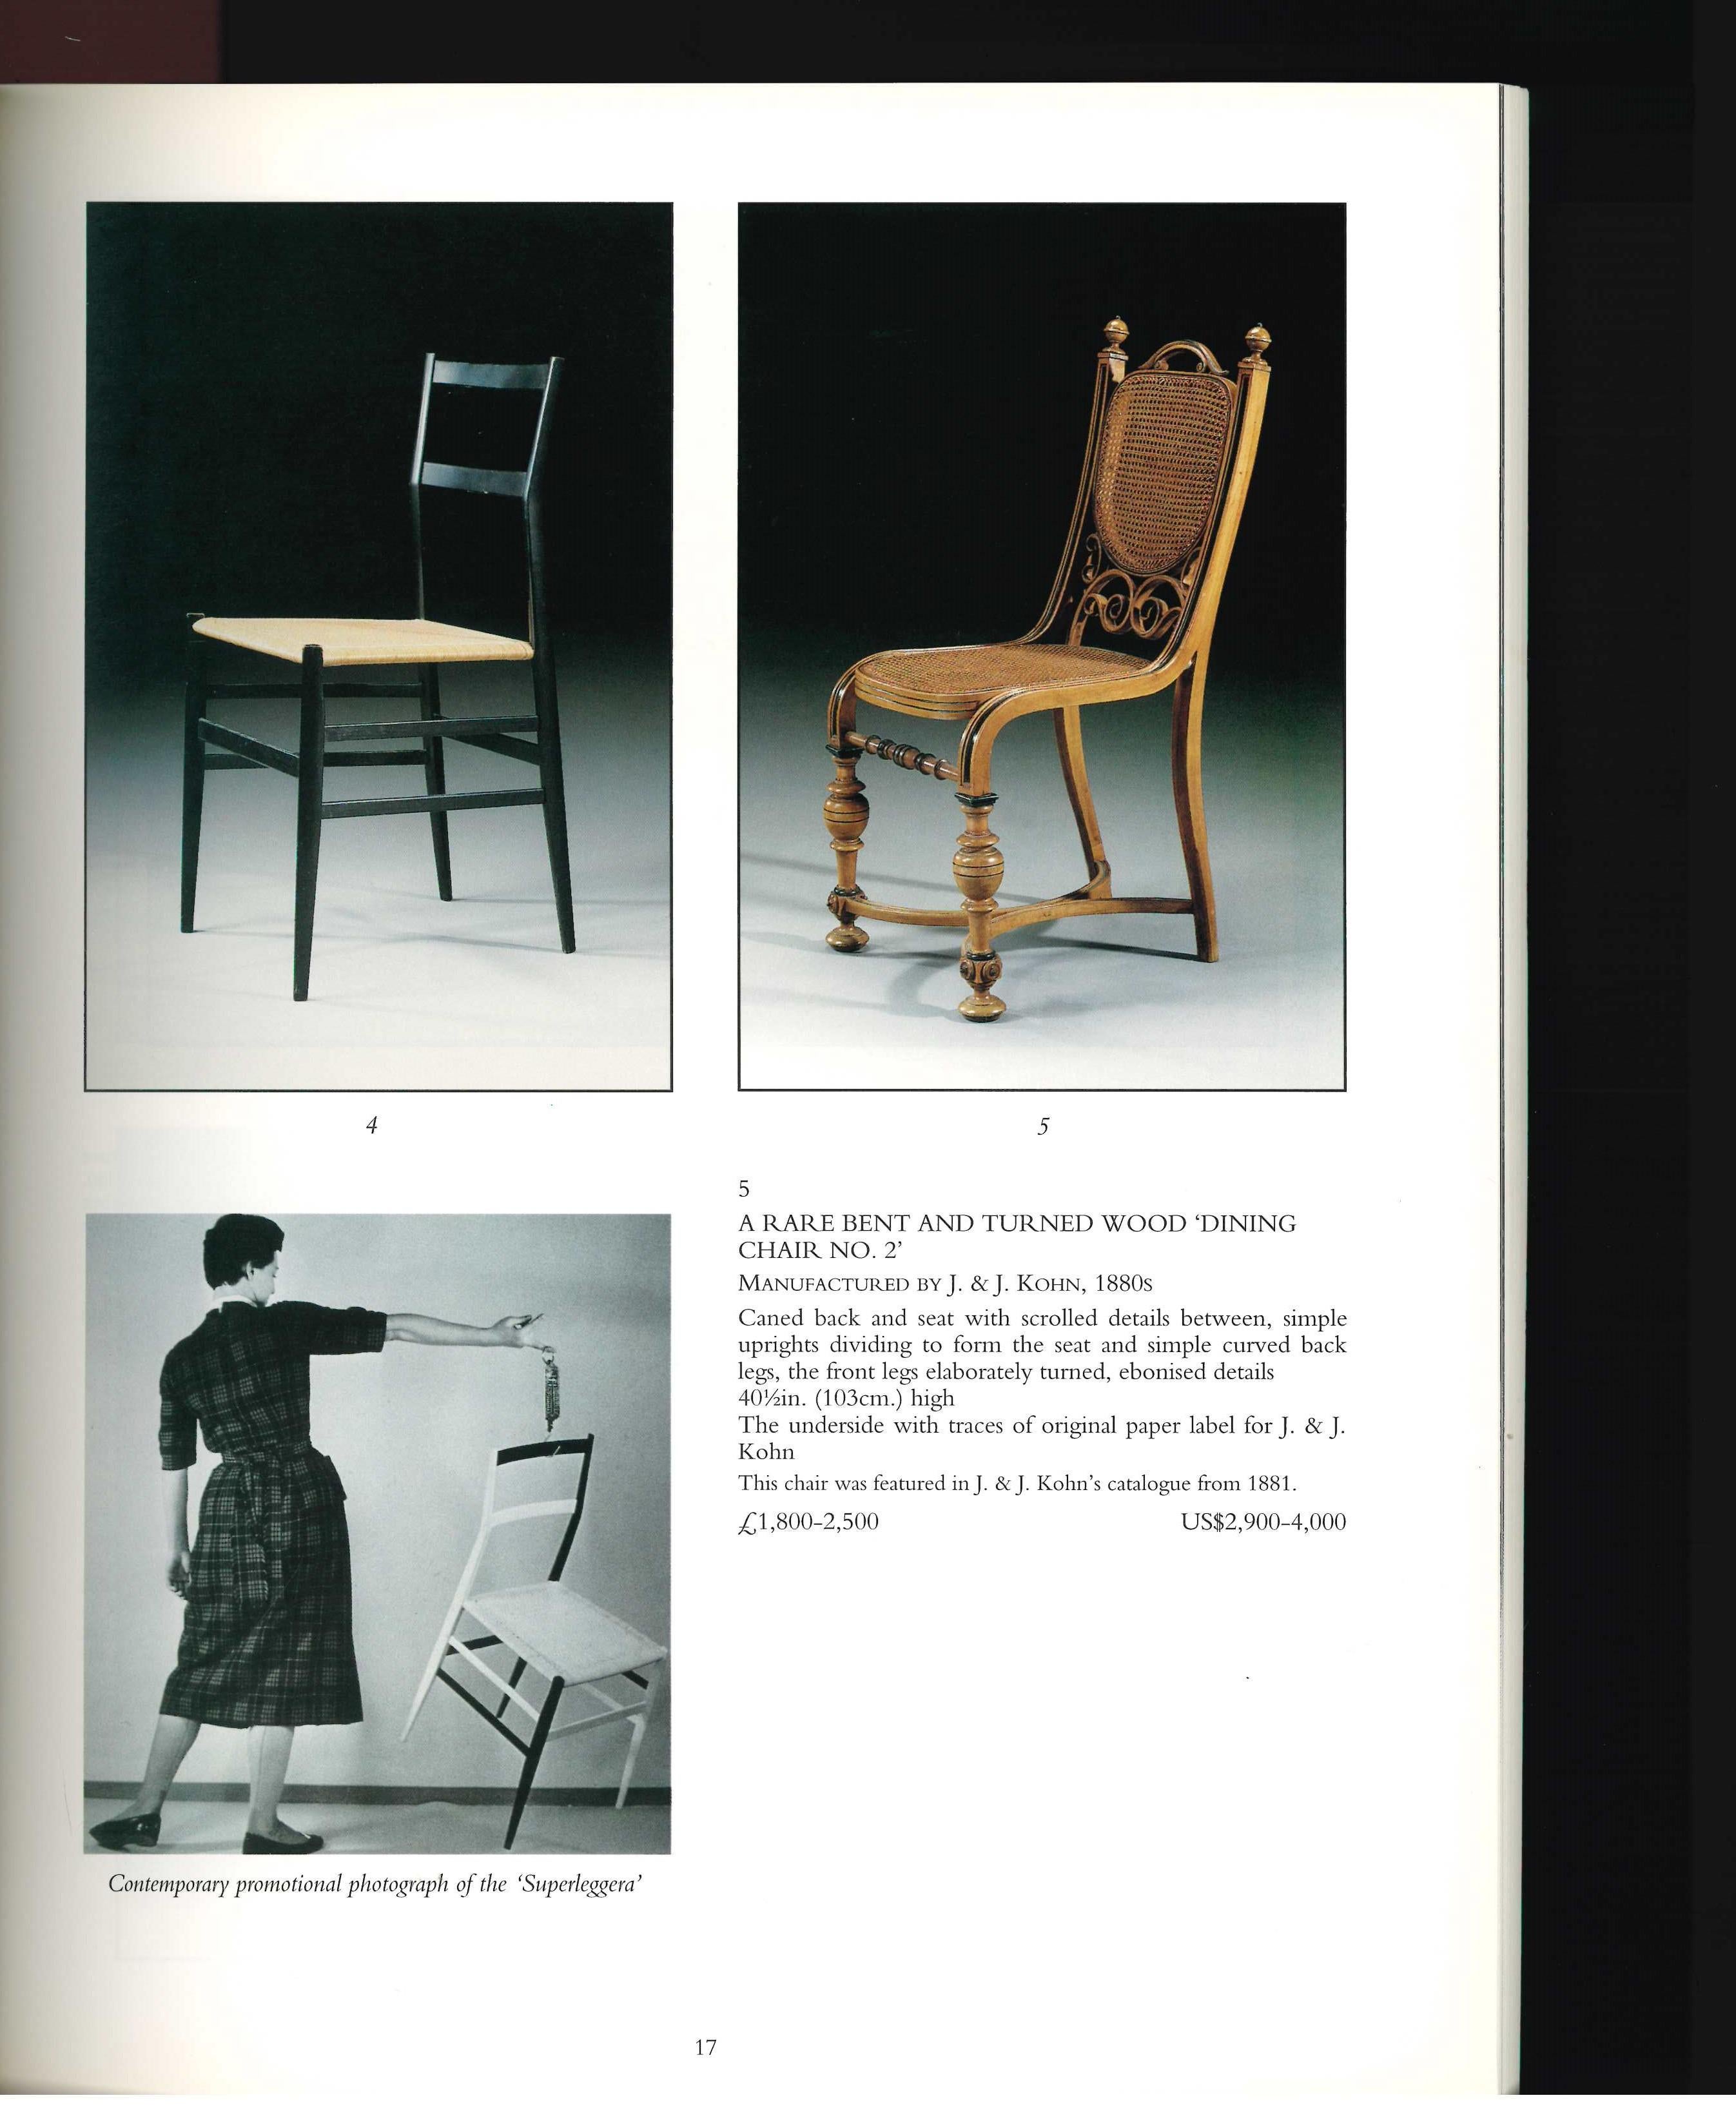 A catalogue produced by Christie's for an auction of Chairs which took place in 1997, with 124 lots all fully illustrated and described, together with auction estimated prices. The catalogue is in good condition and is entirely devoted to 